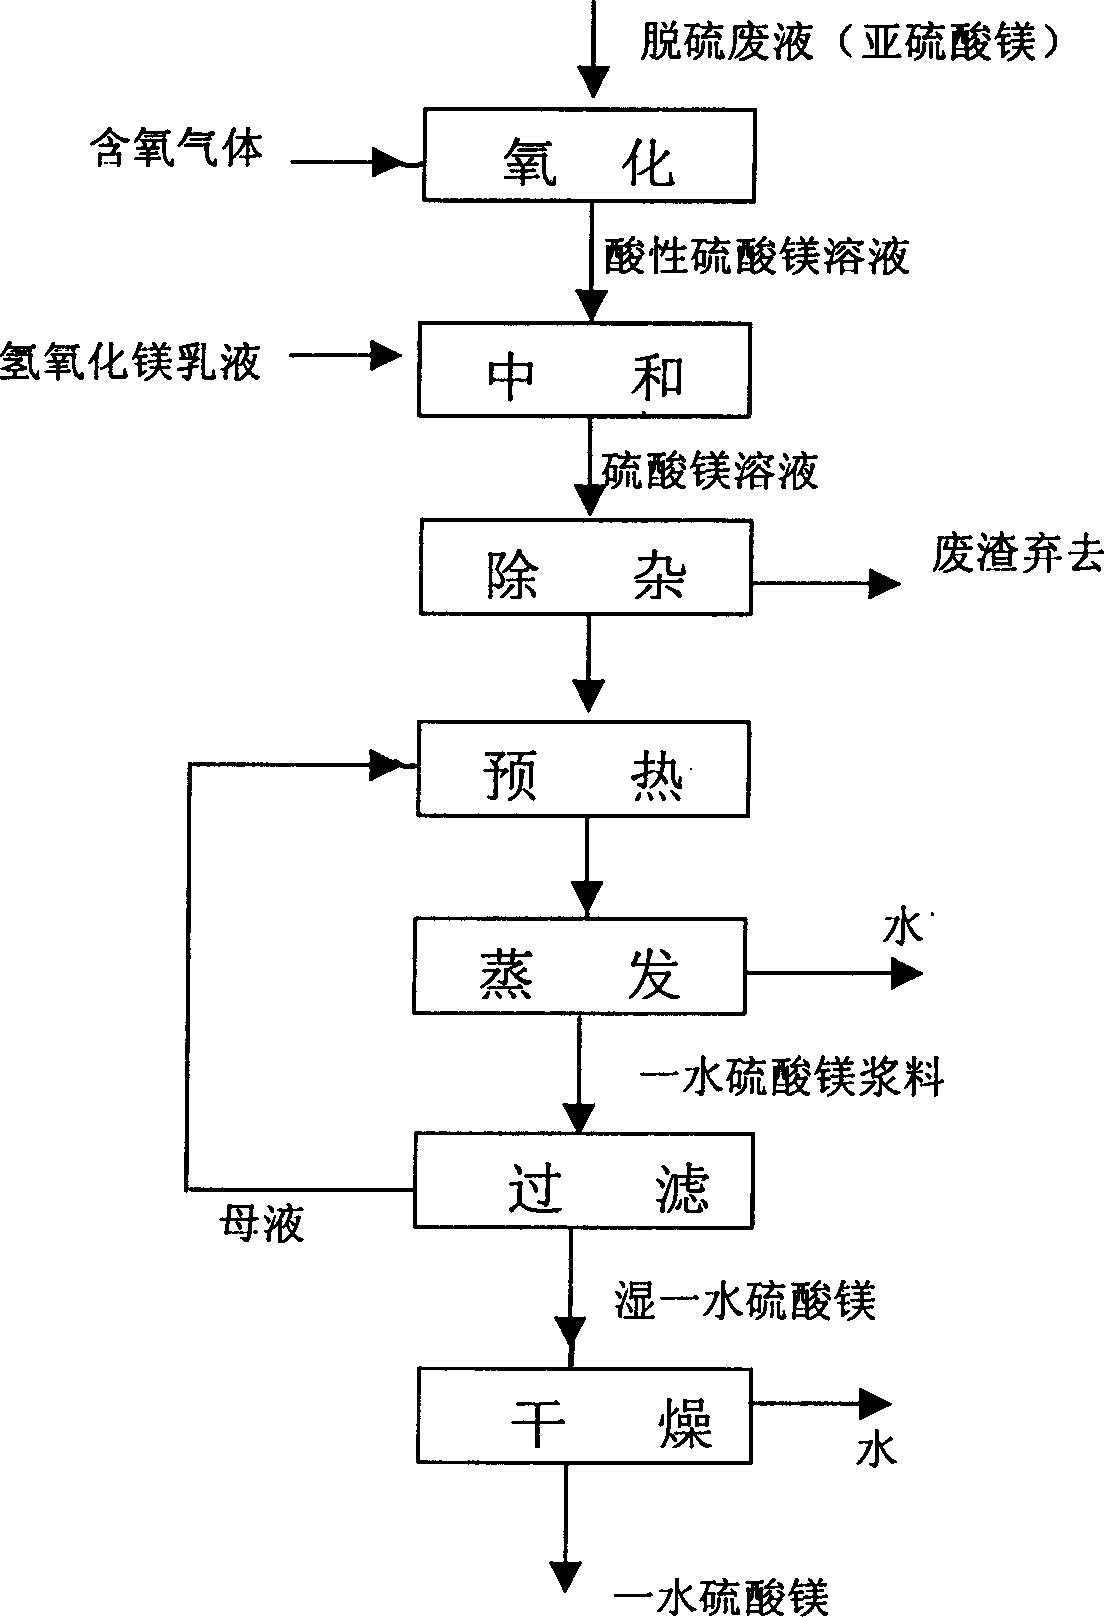 Magnesium sulfate production method using magnesium oxide and desulfurated waste fluid